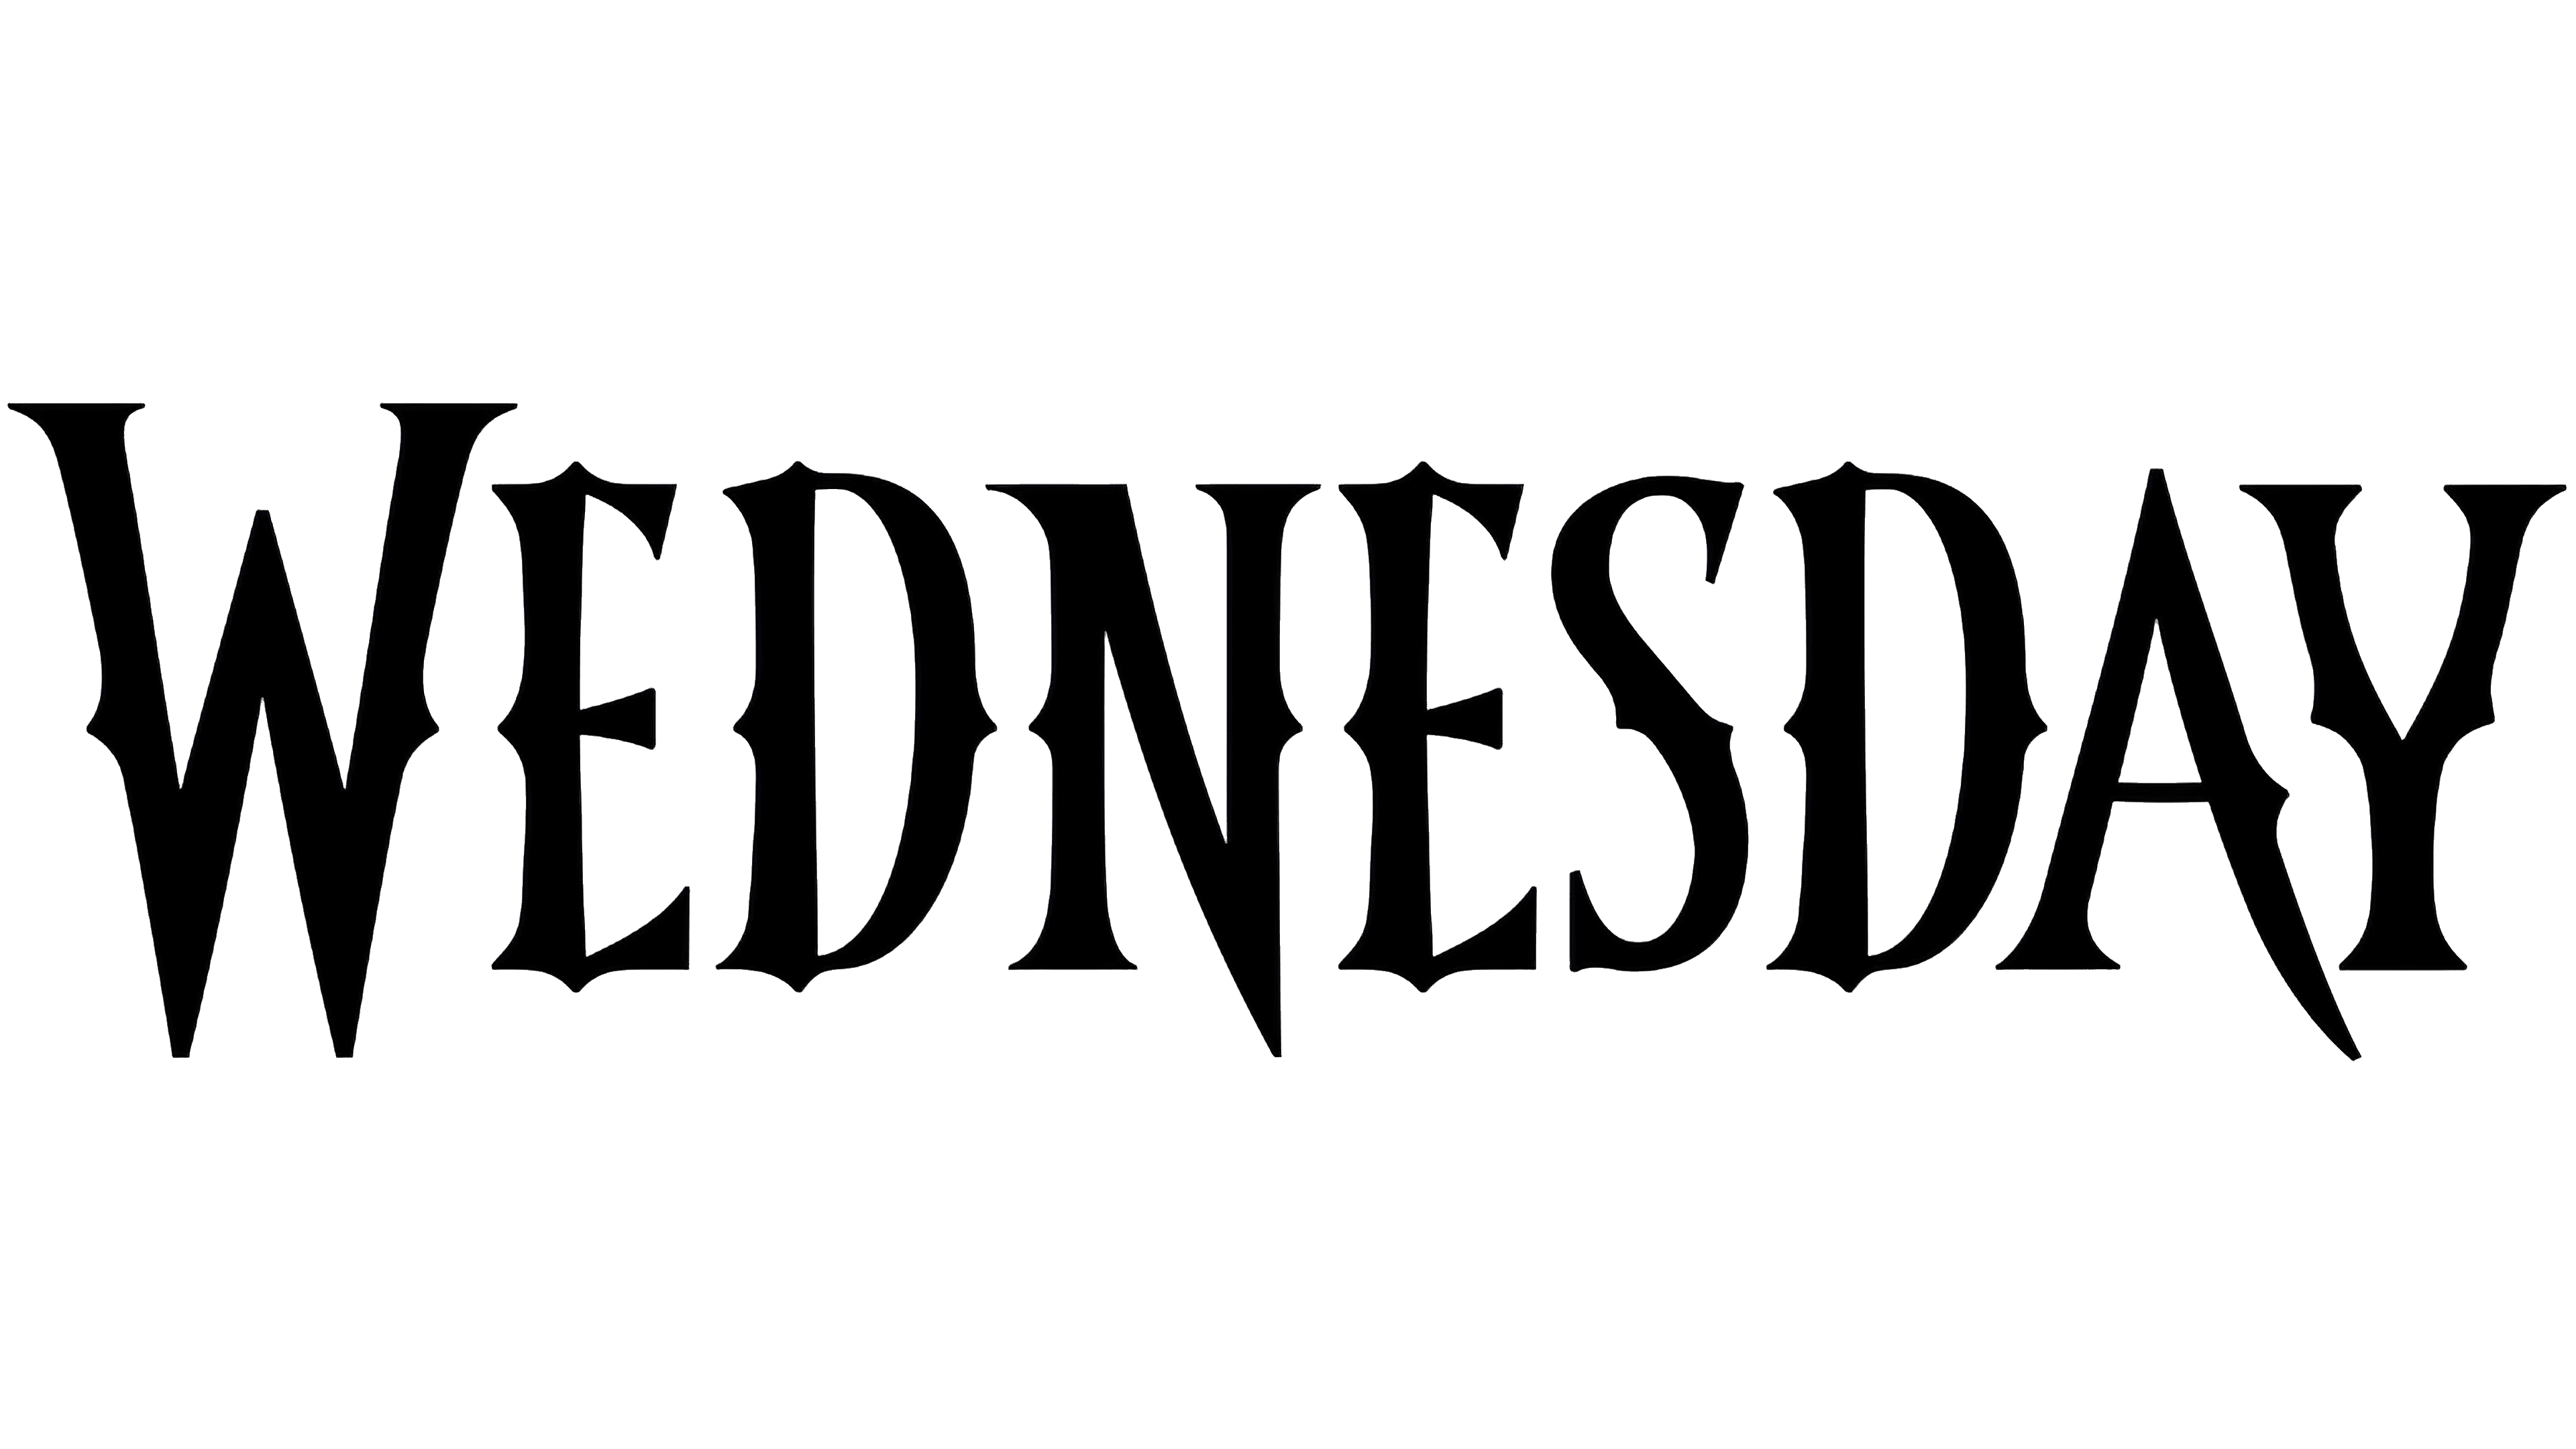 Wednesday Logo, symbol, meaning, history, PNG, brand